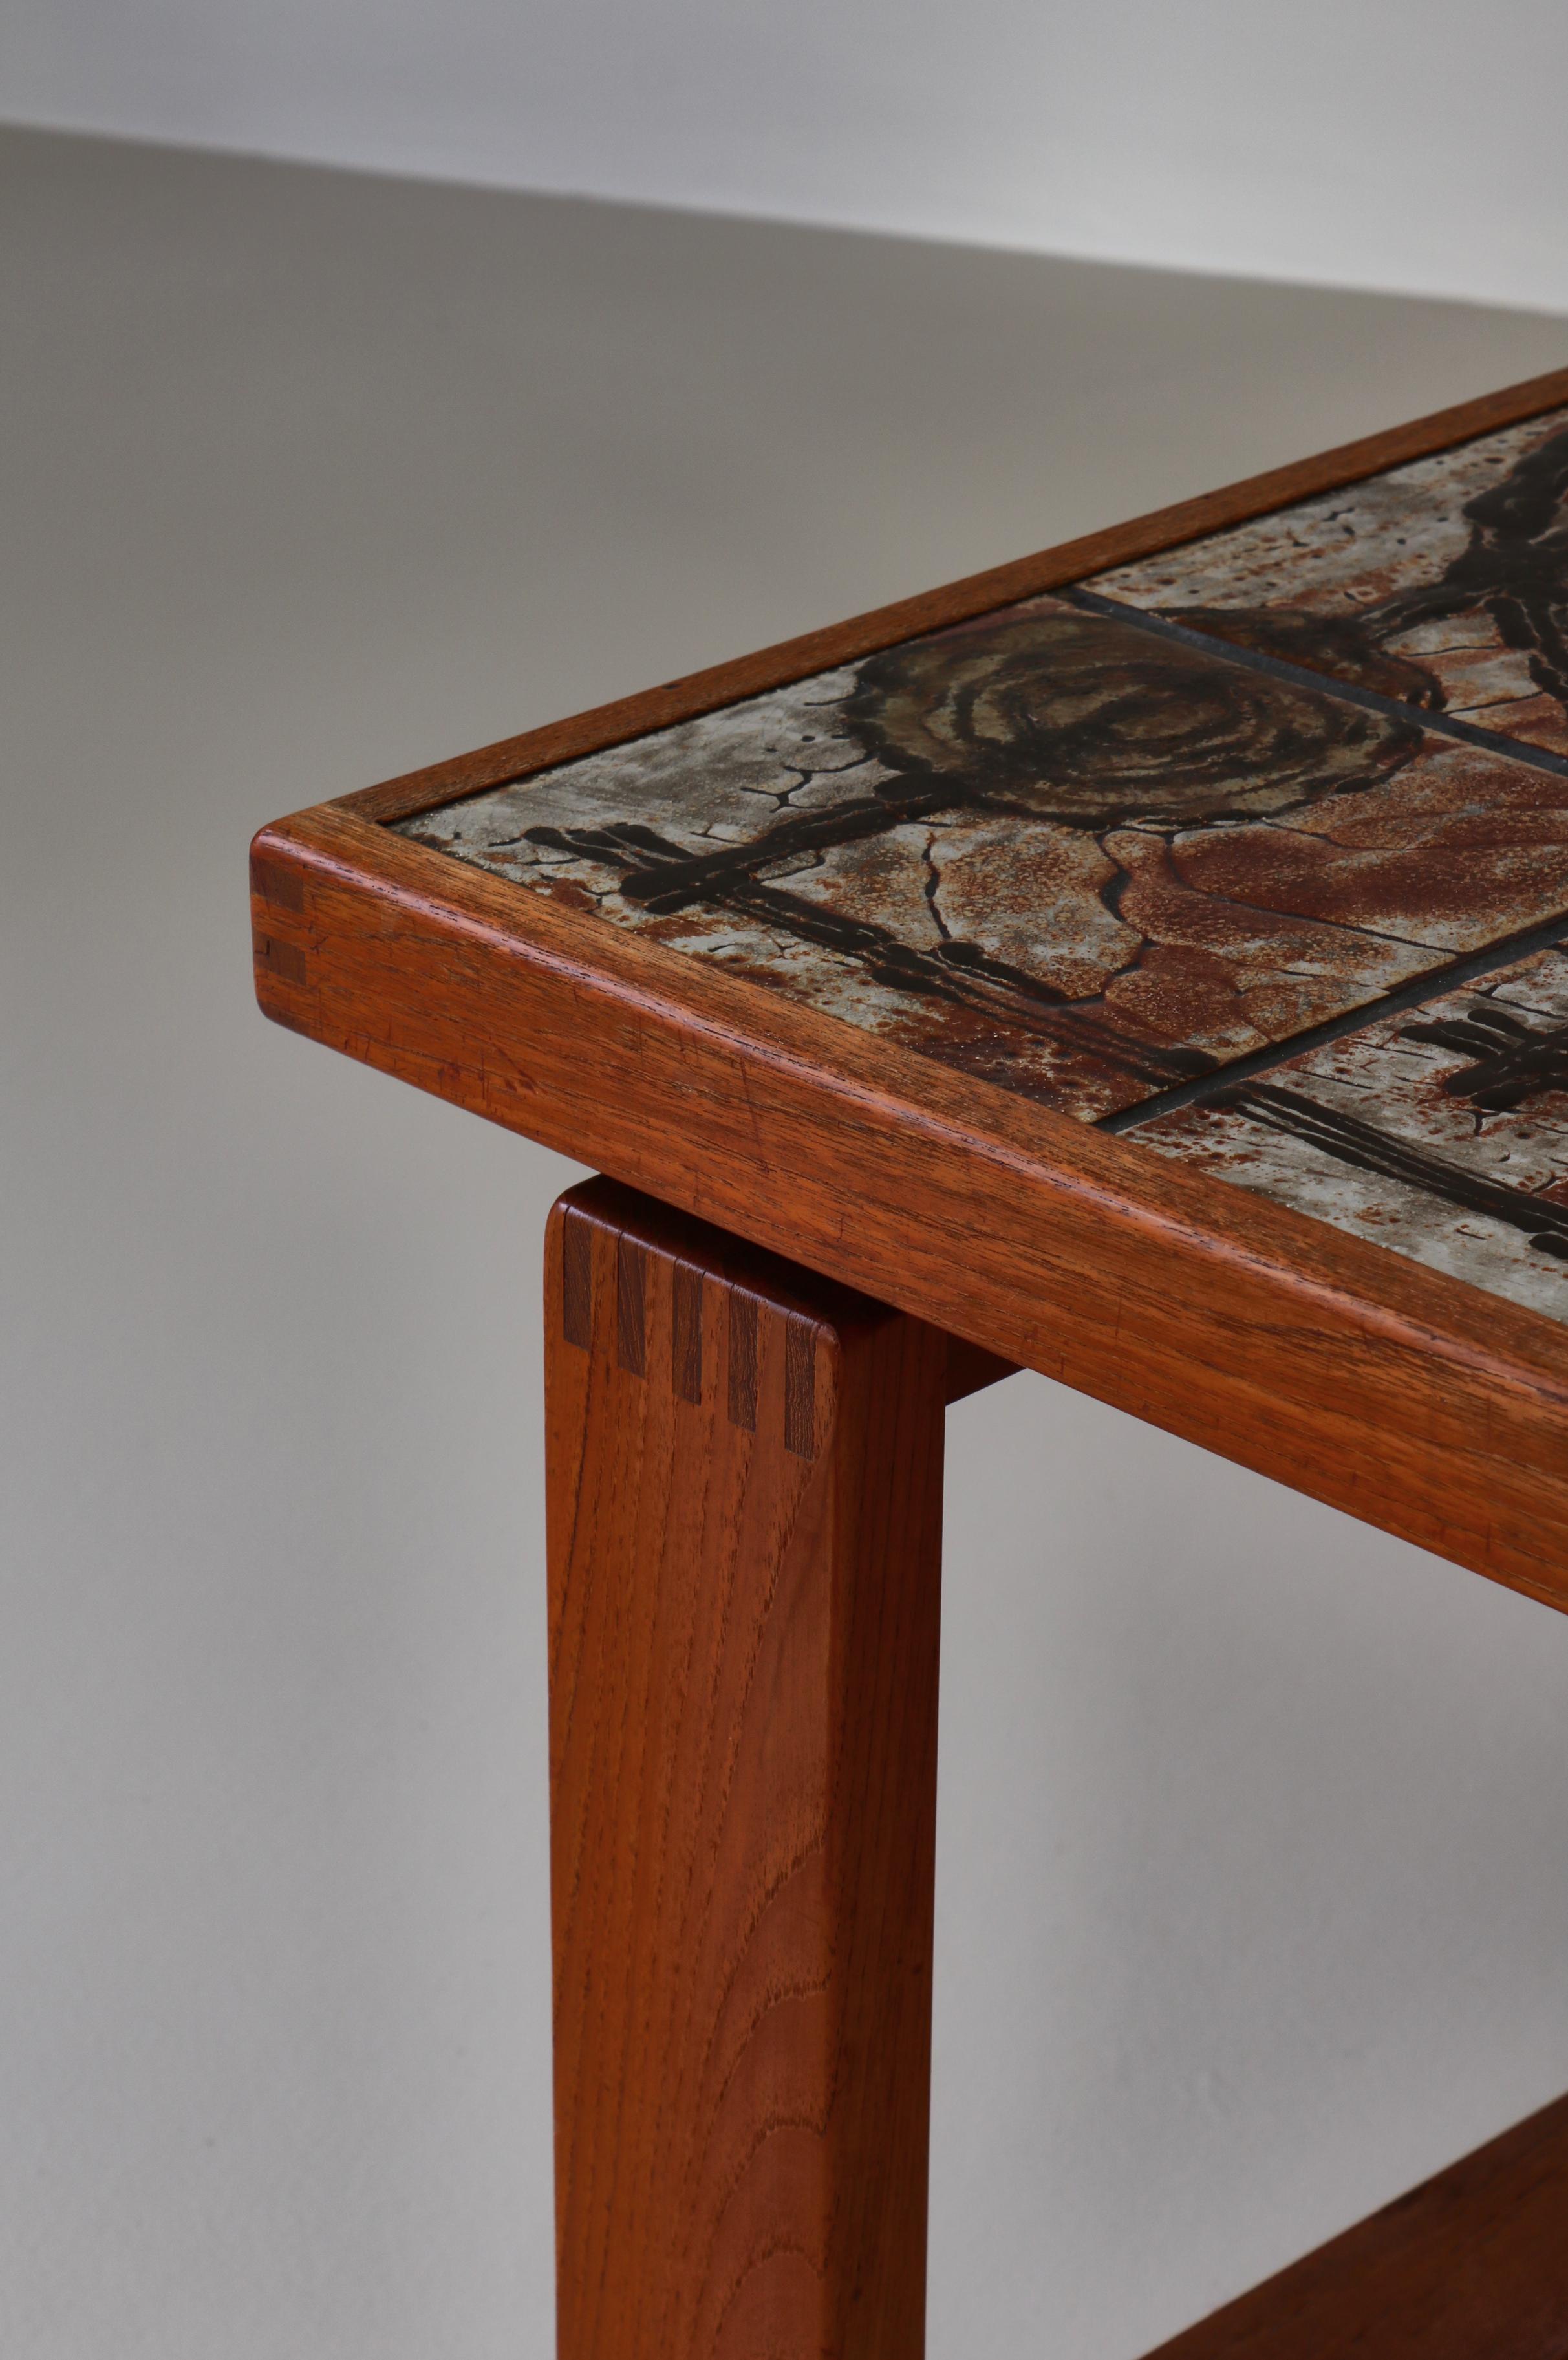 Danish Modern Center Table in Solid Teakwood & Ceramic Tiles by Ox-Art, 1973 In Good Condition For Sale In Odense, DK